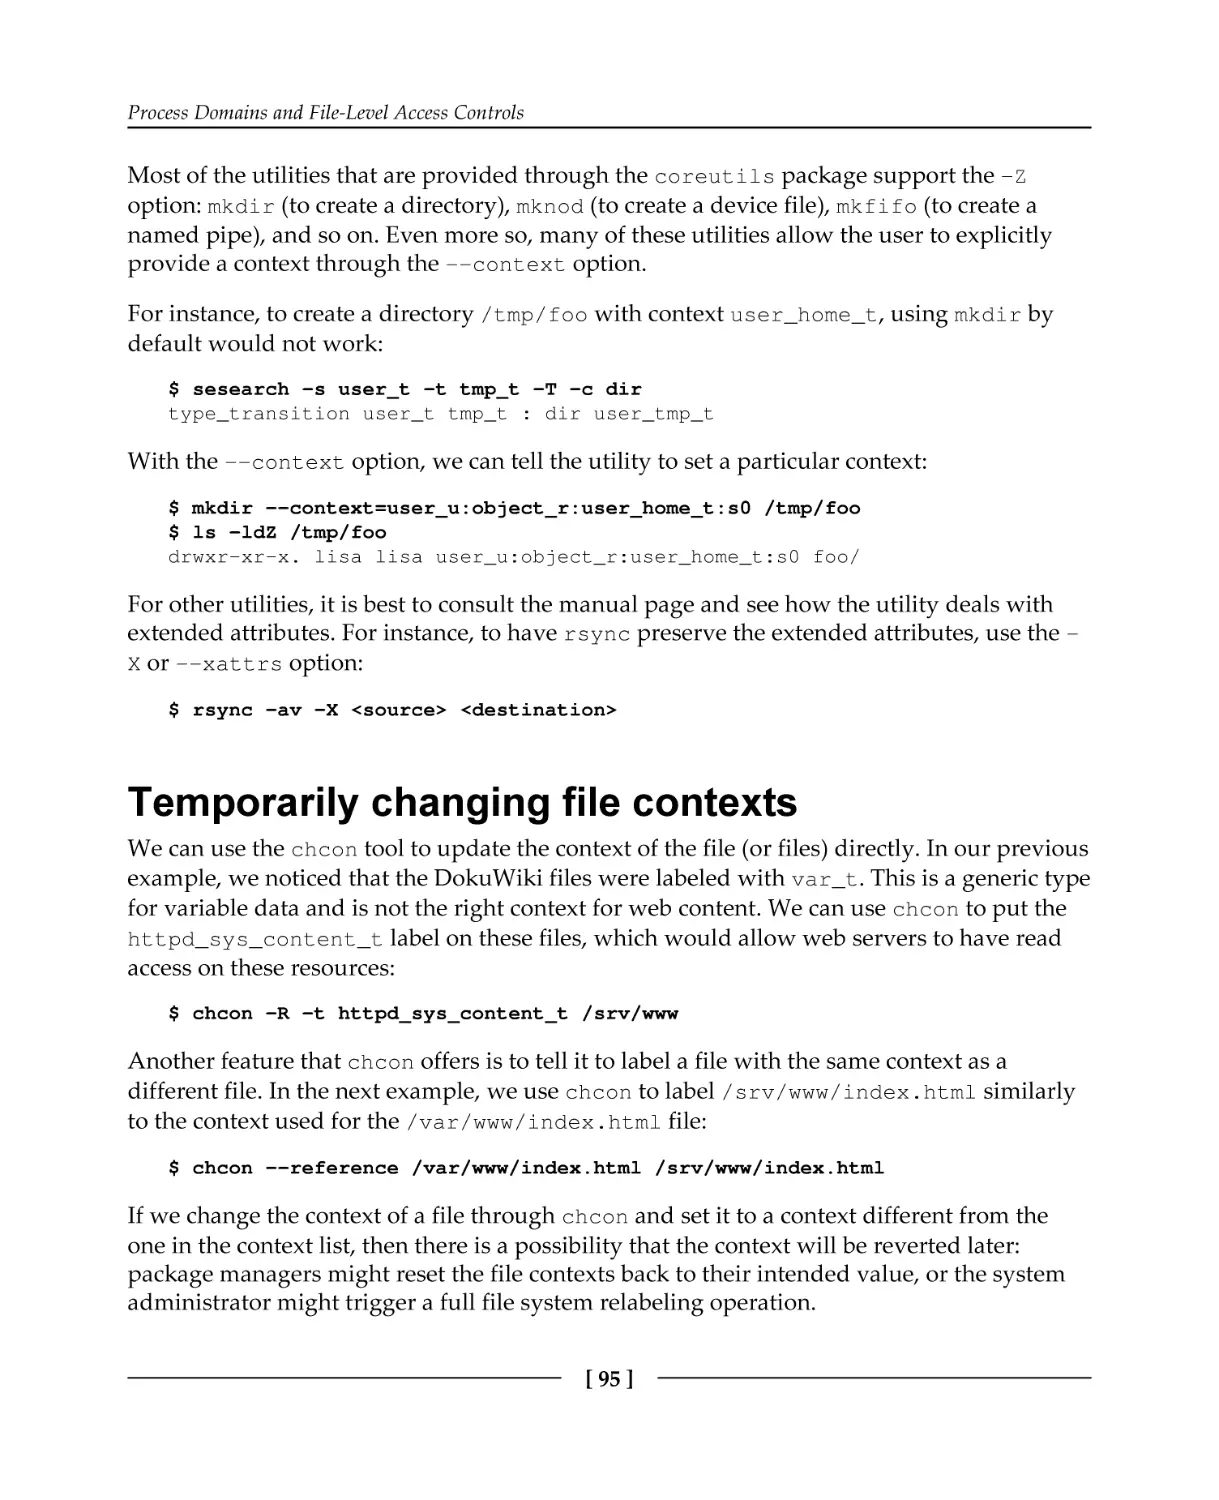 Temporarily changing file contexts